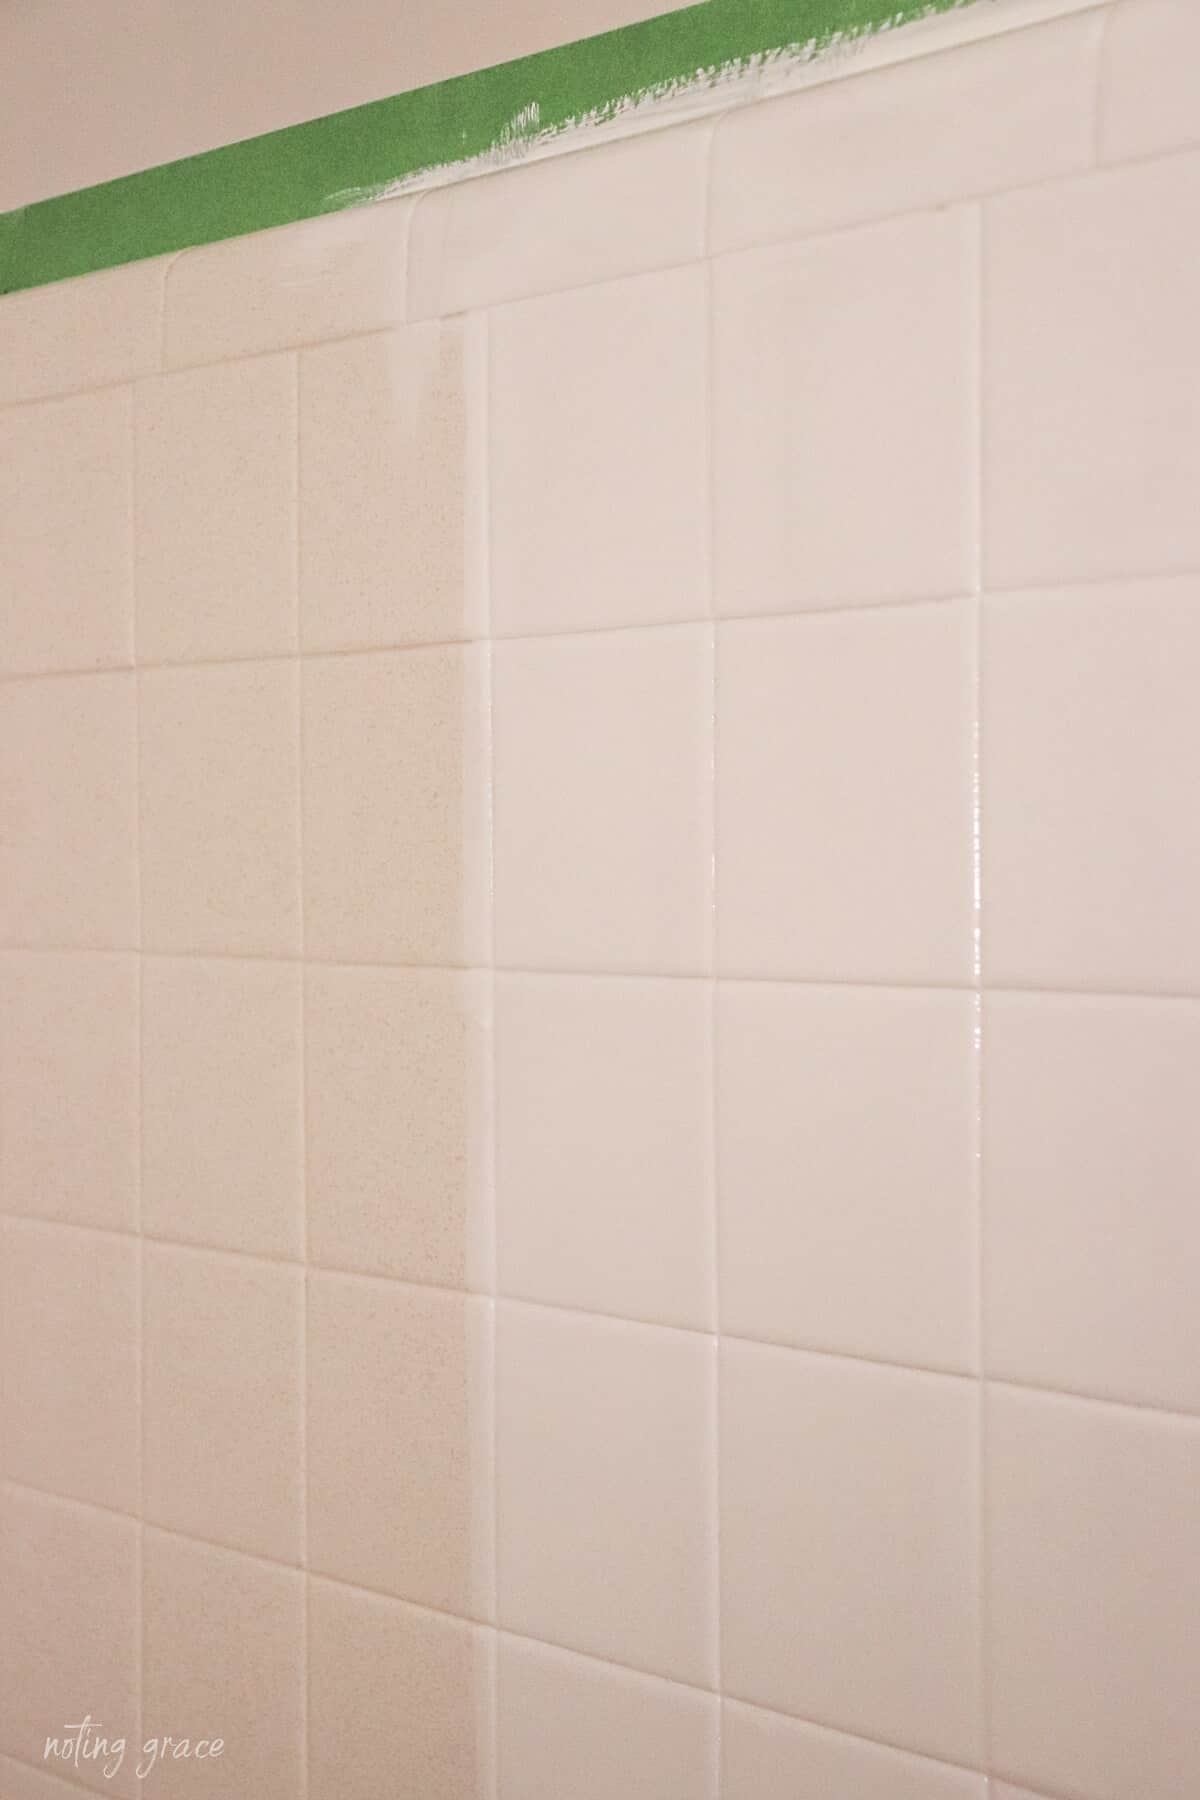 Wall tile half painted white